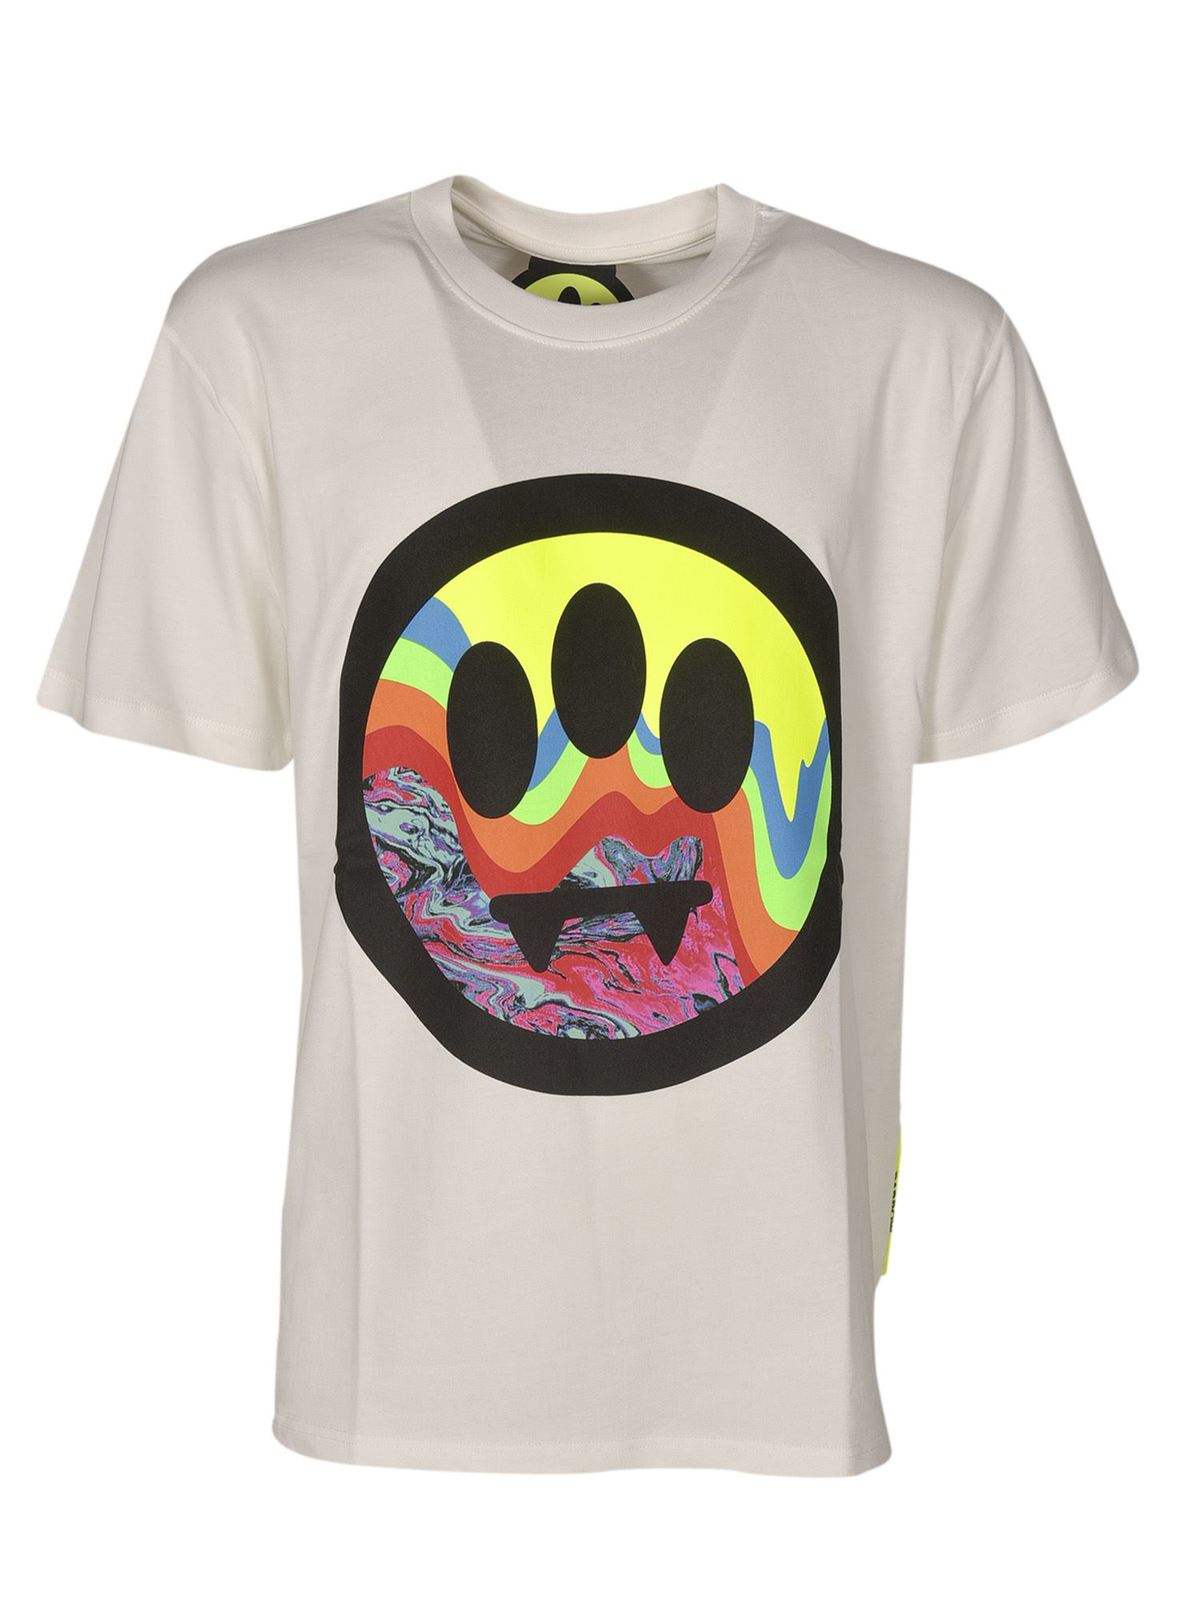 BARROW MULTIcolour FRONT LOGO T-SHIRT IN WHITE